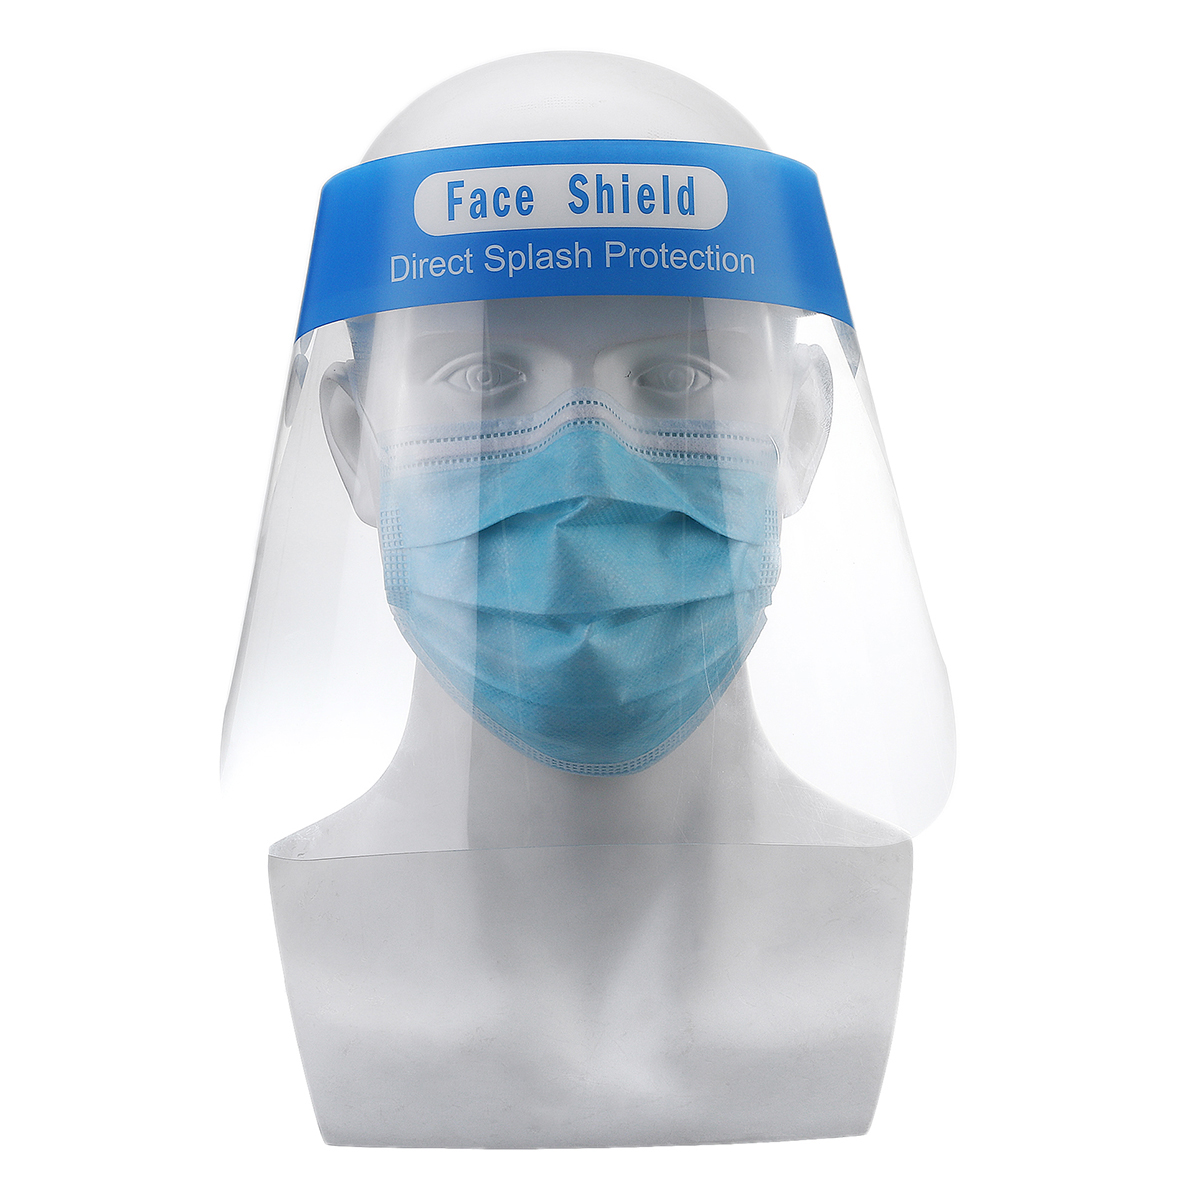 Face-Mask-Shield-Protective-Hat-Reusable-Clear-Disposable-Safety-Full-Face-Isolation-Shield-1659450-3